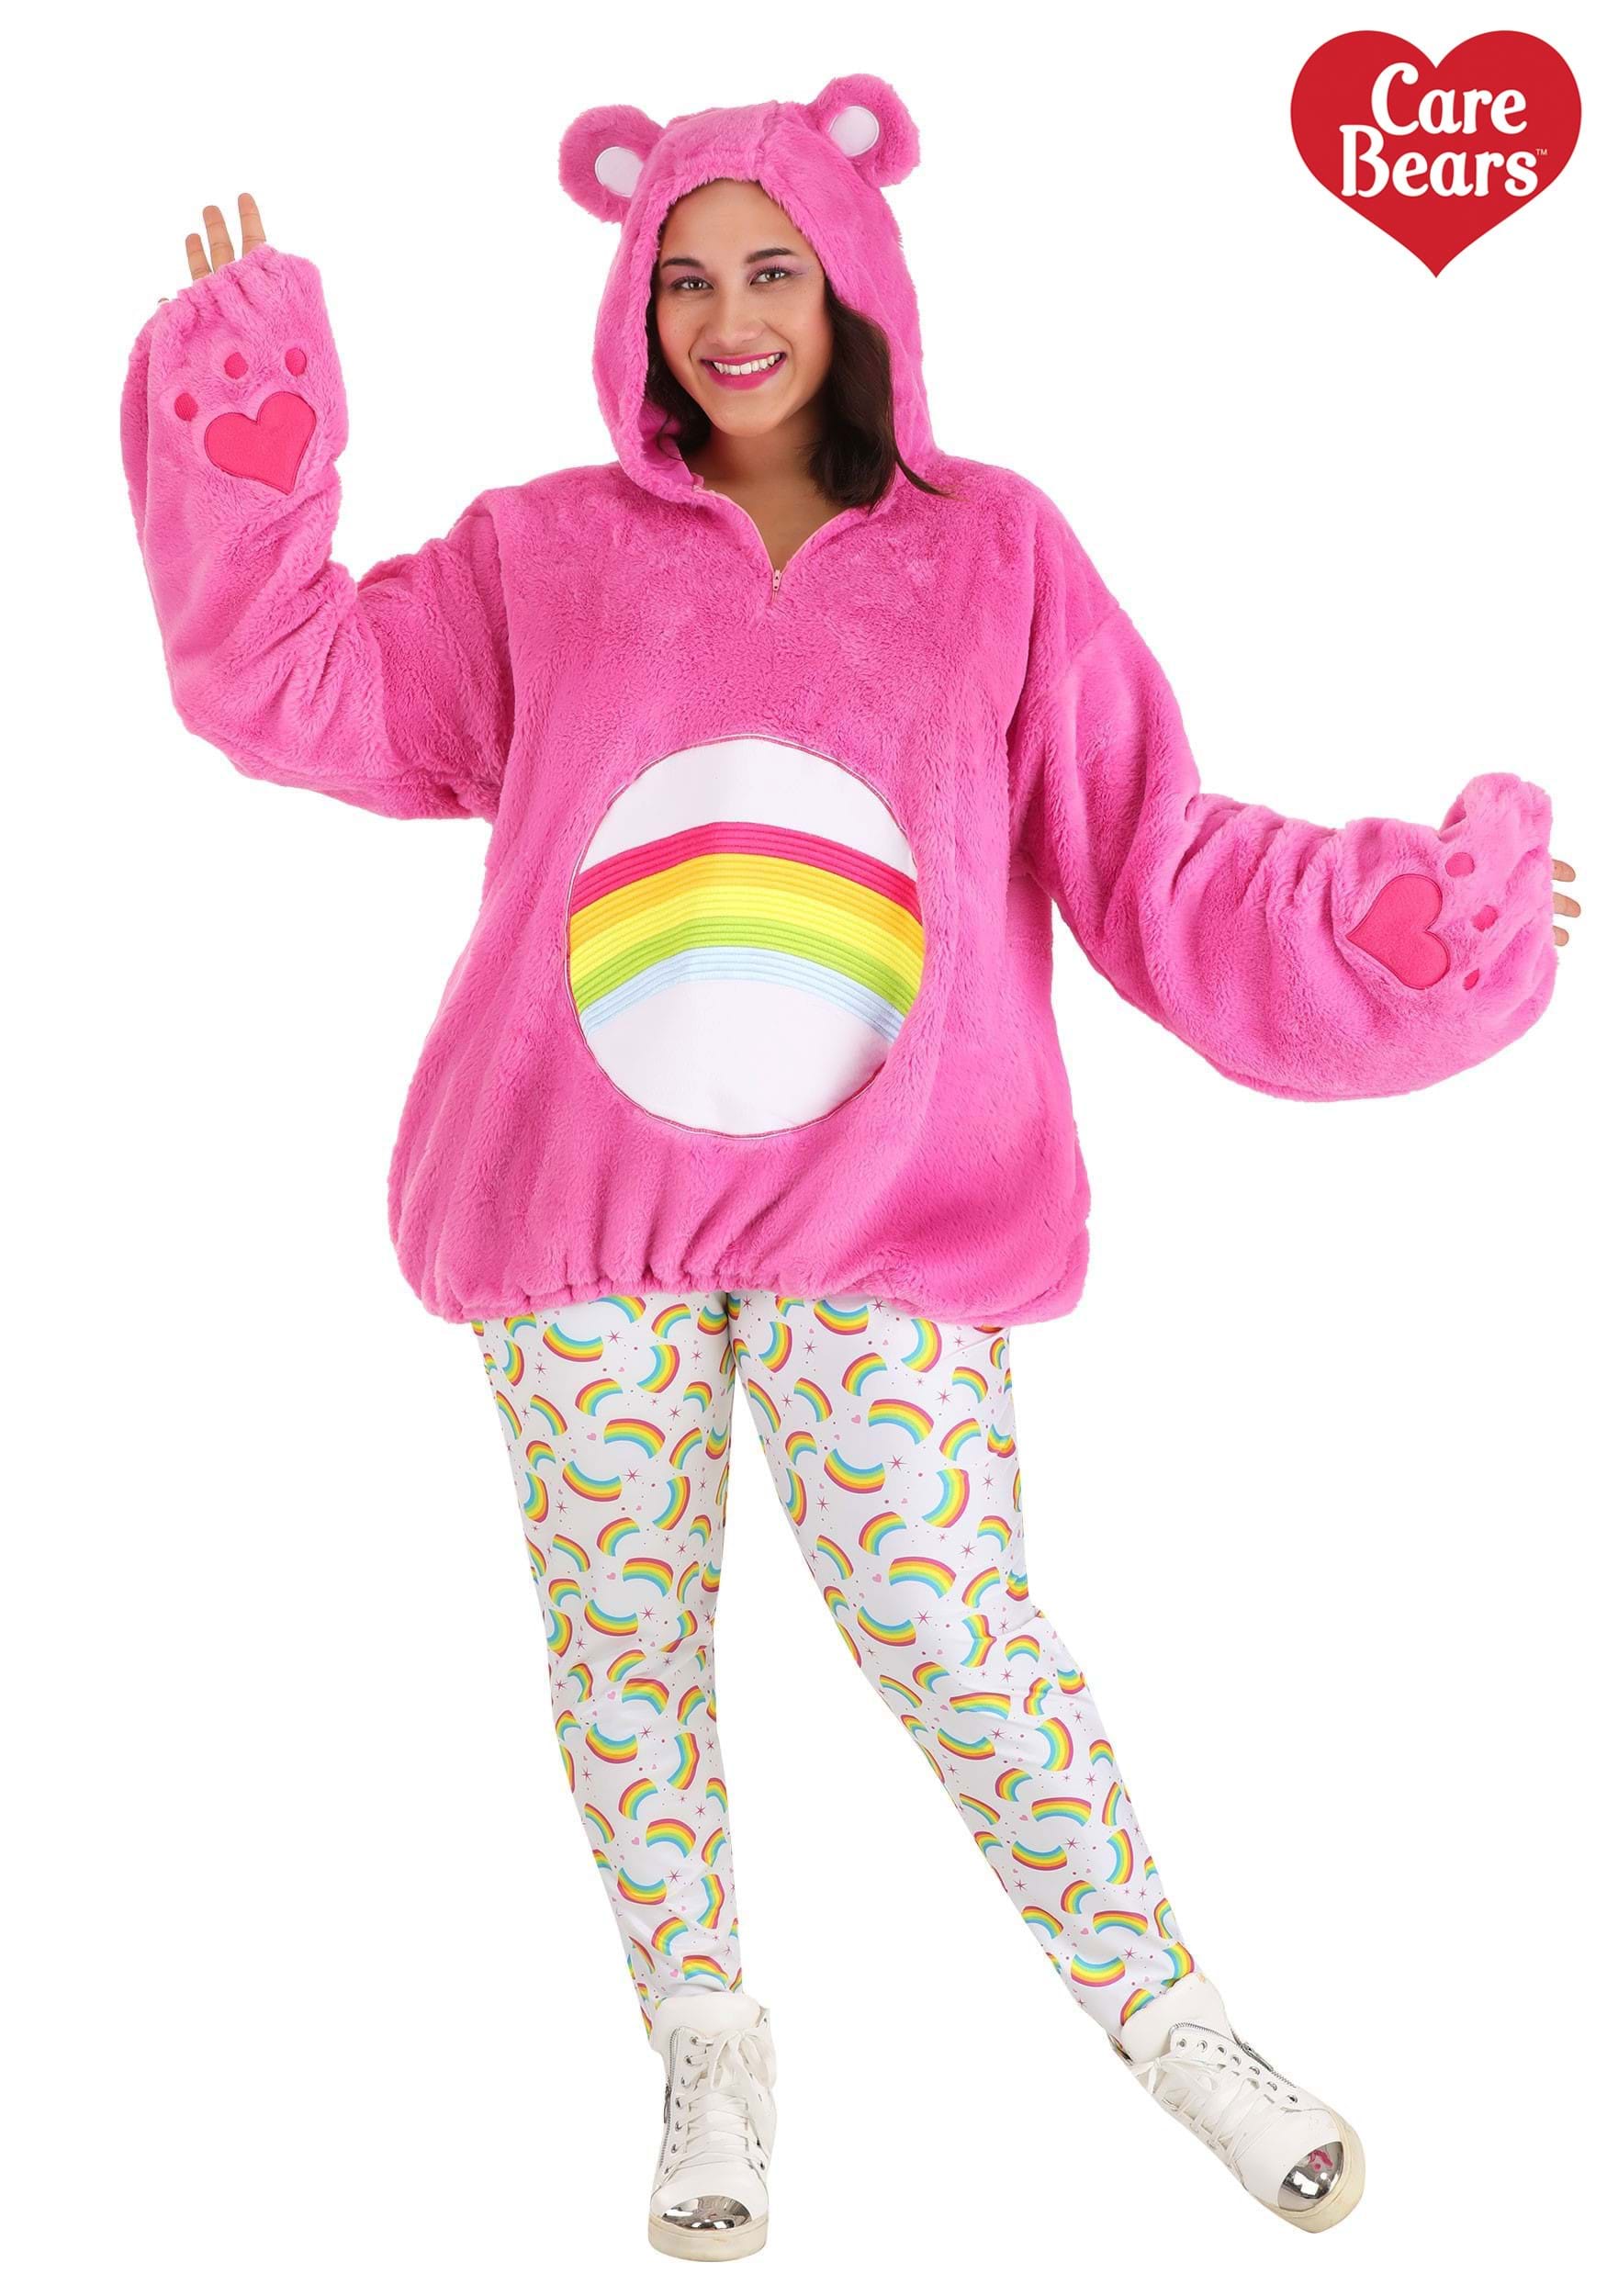 Care Bears Deluxe Cheer Bear Costume For Plus Size Women 1x 2x